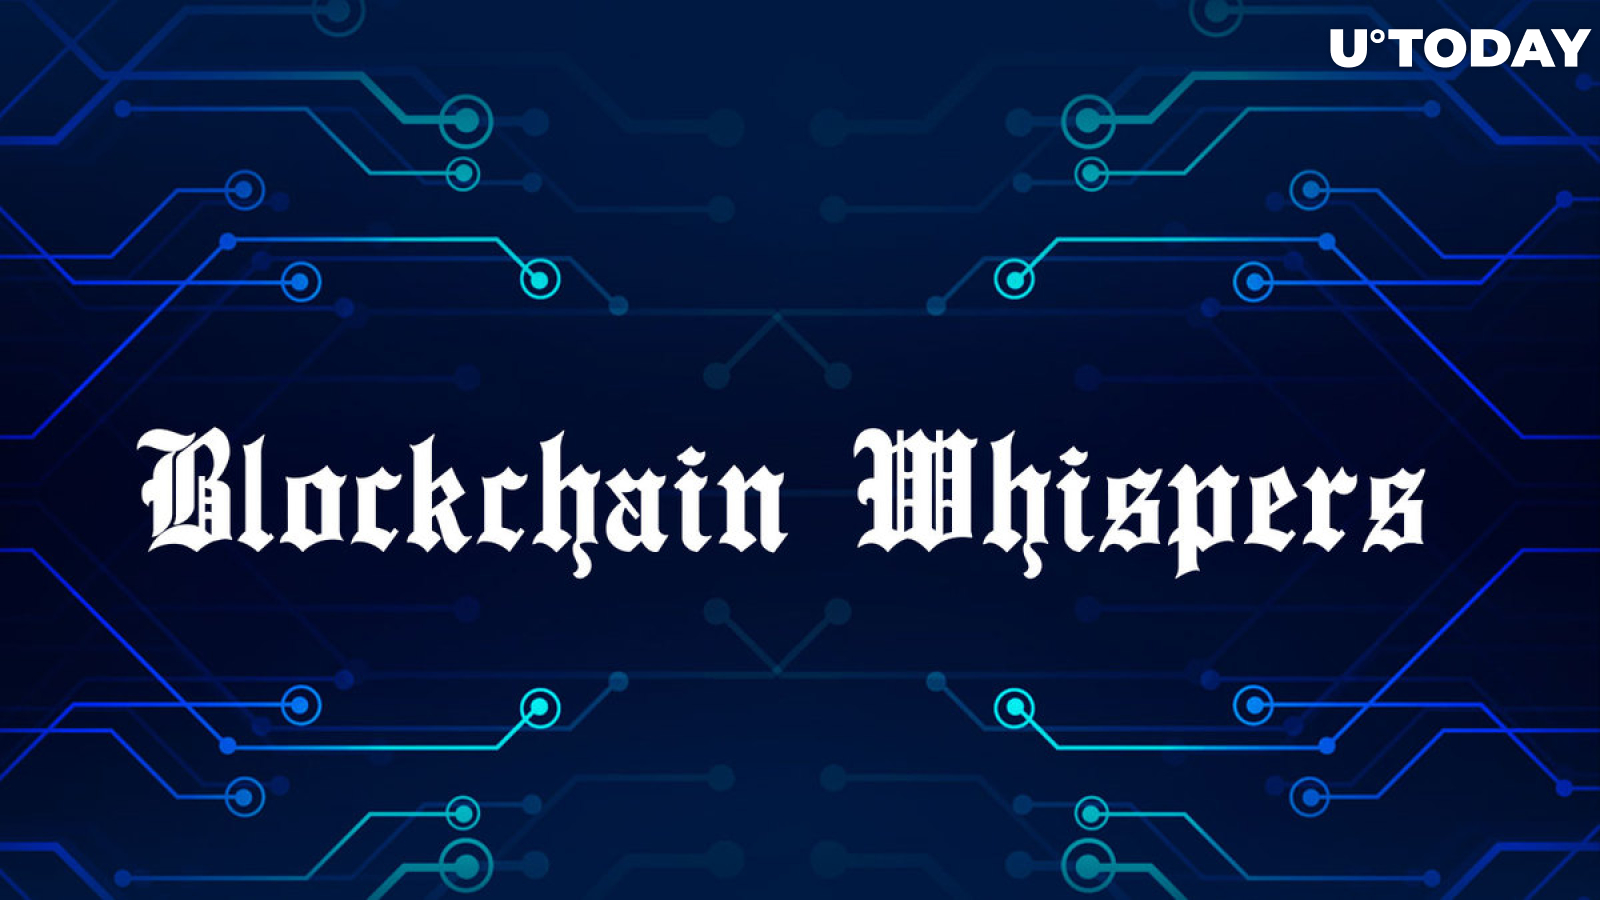 Blockchain Whispers Offers Reliable Crypto Trading Content: Details